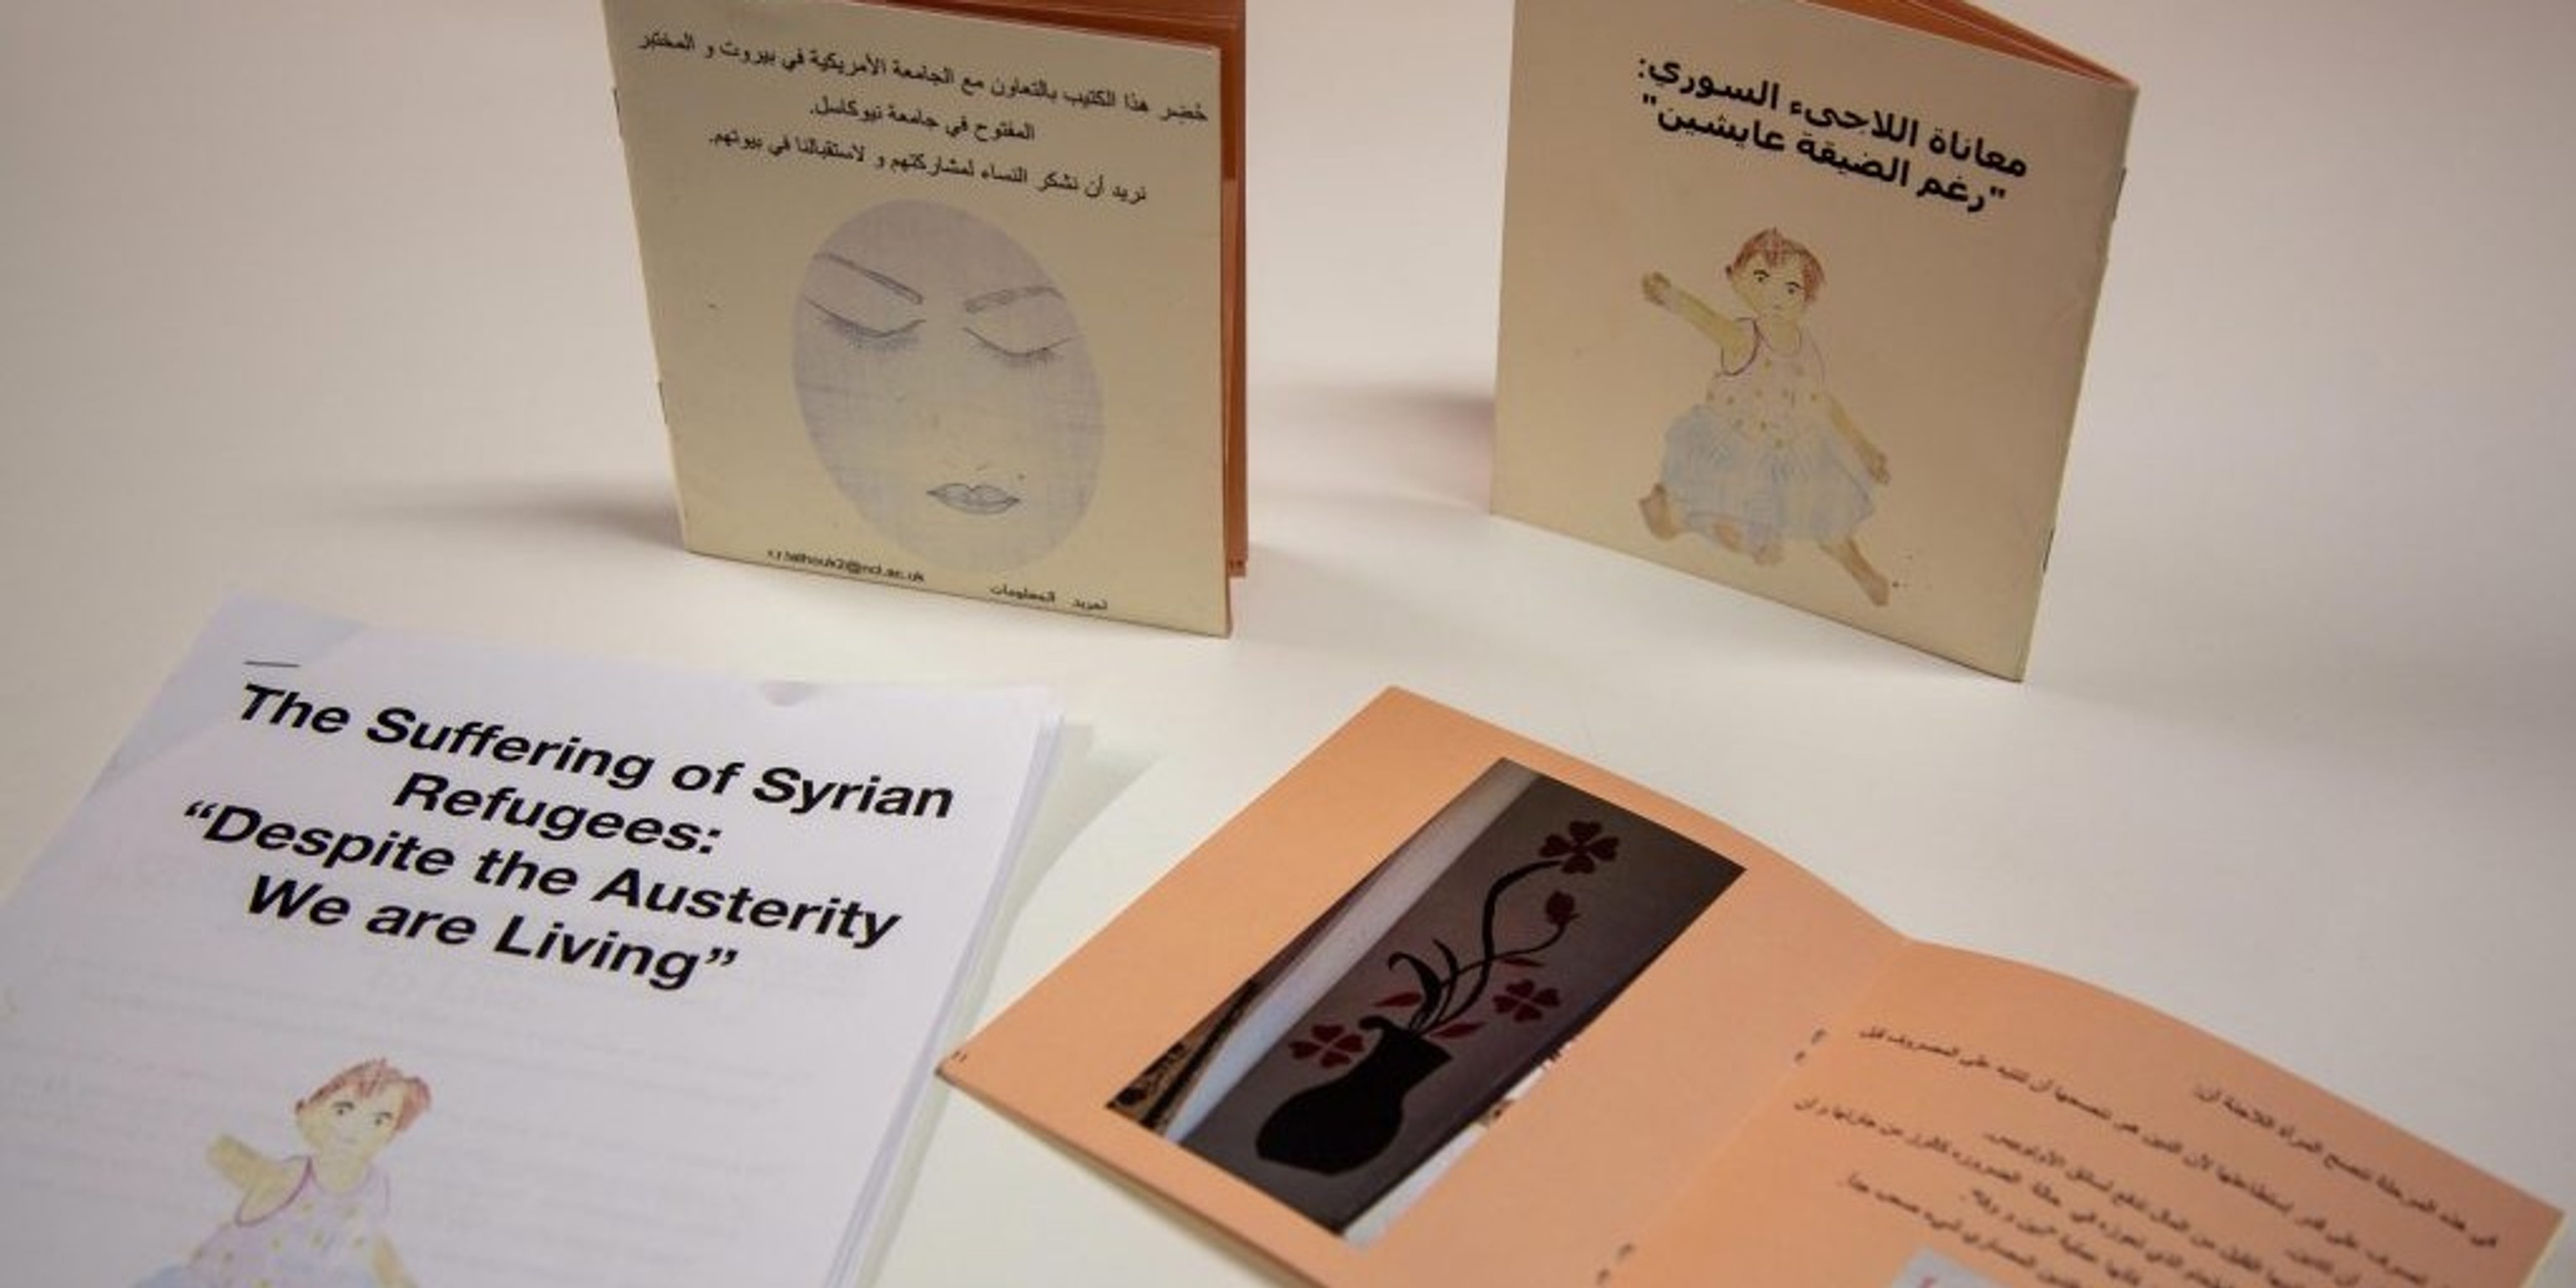 Involving Syrian refugees in design research: Lessons learnt from the field